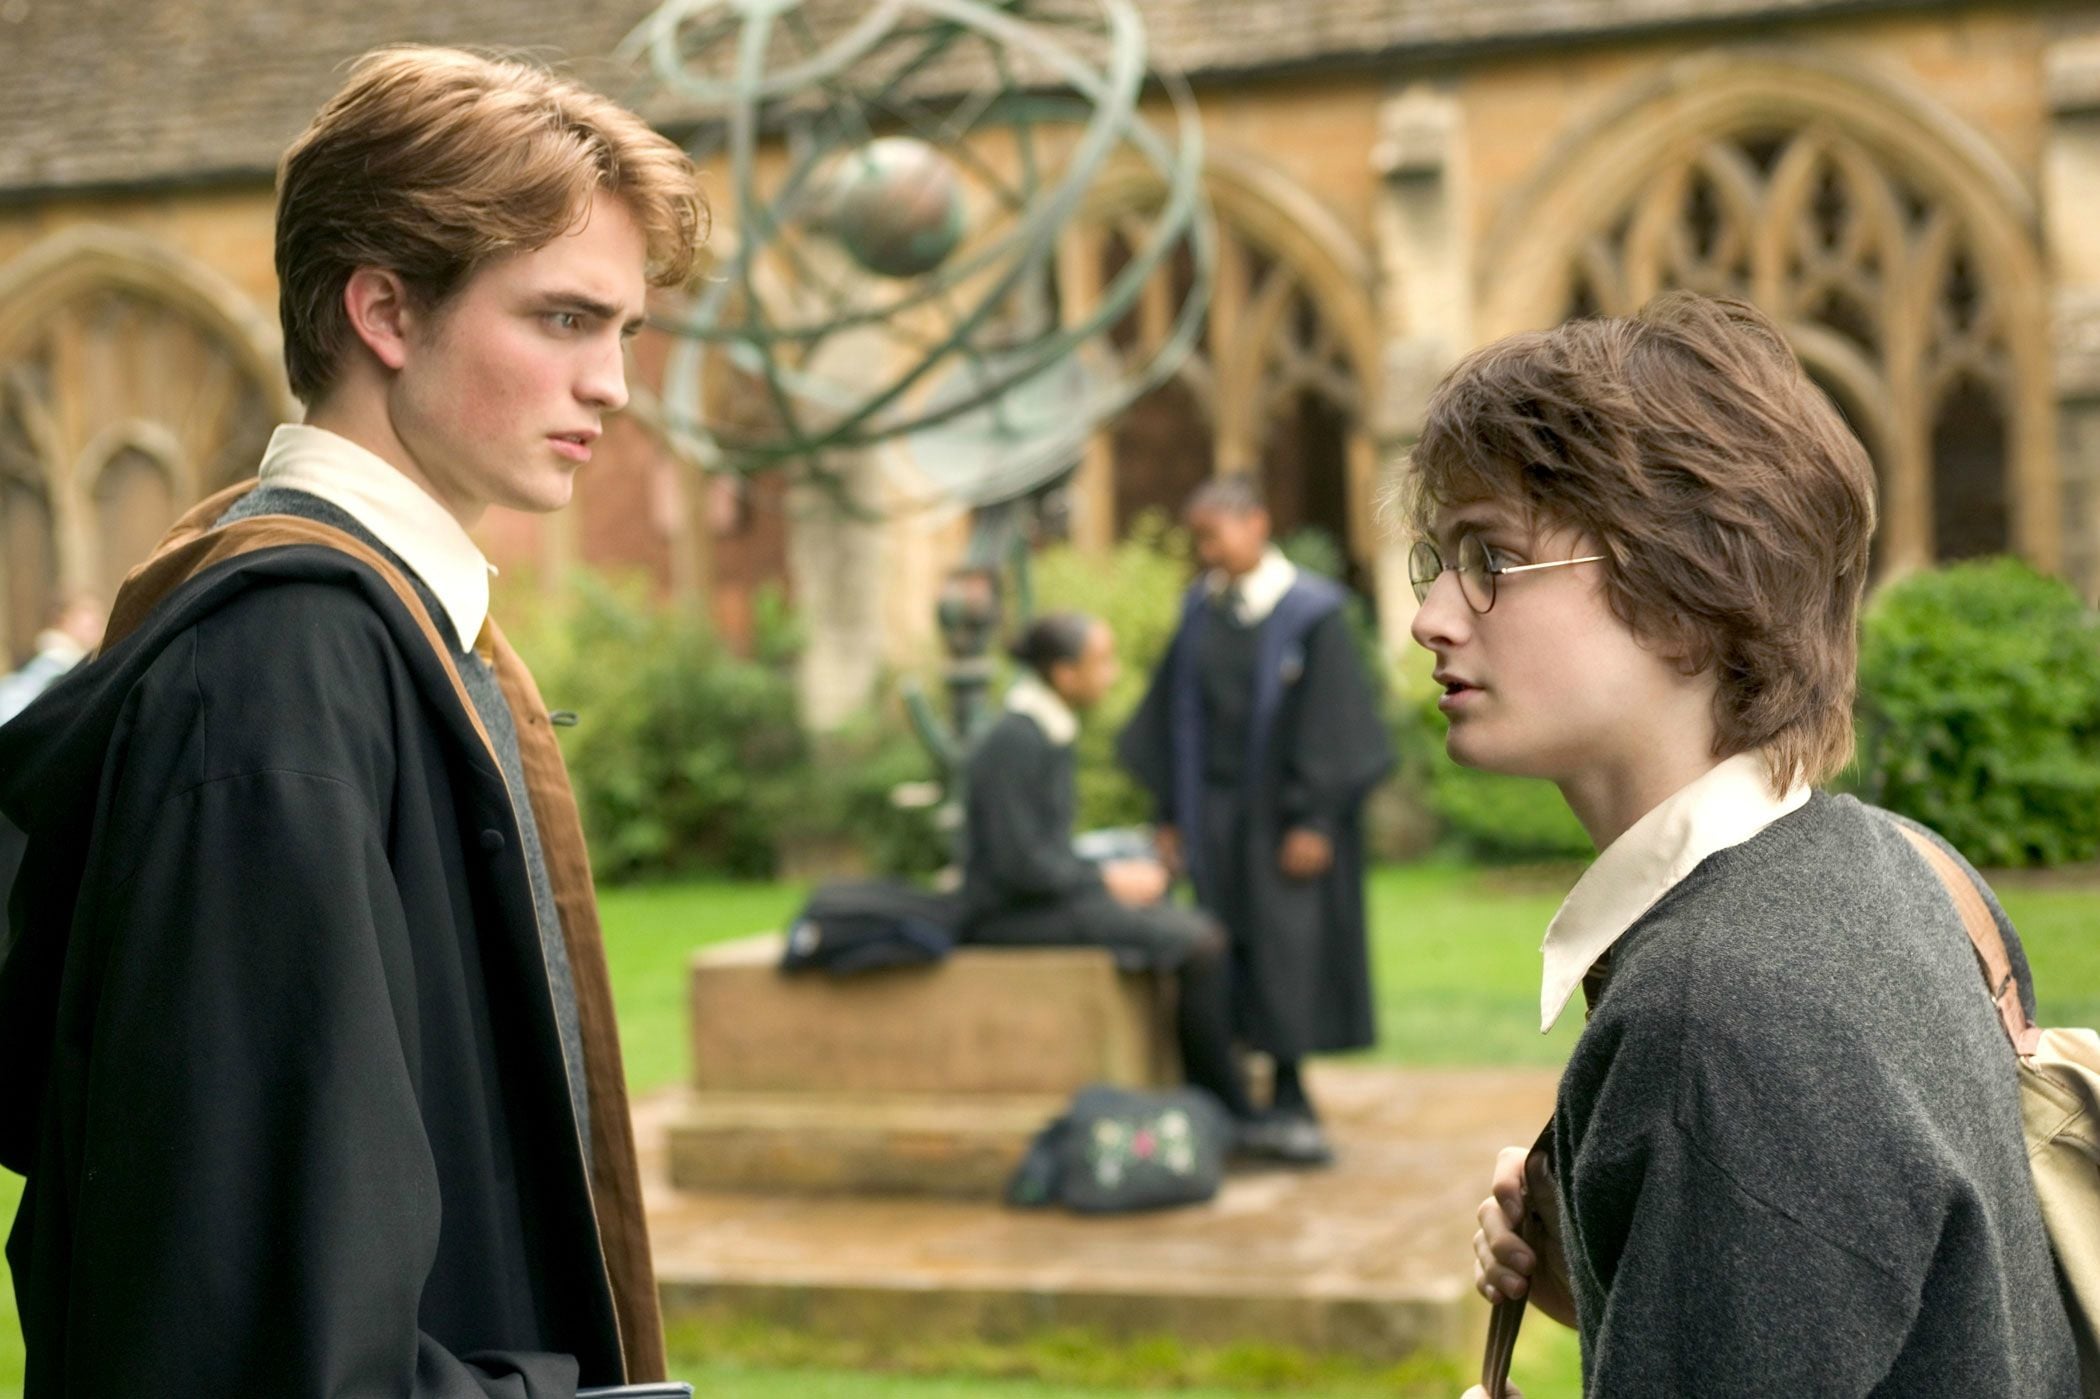 Robert Pattinson was 17, when he was cast in the Harry Potter franchise.